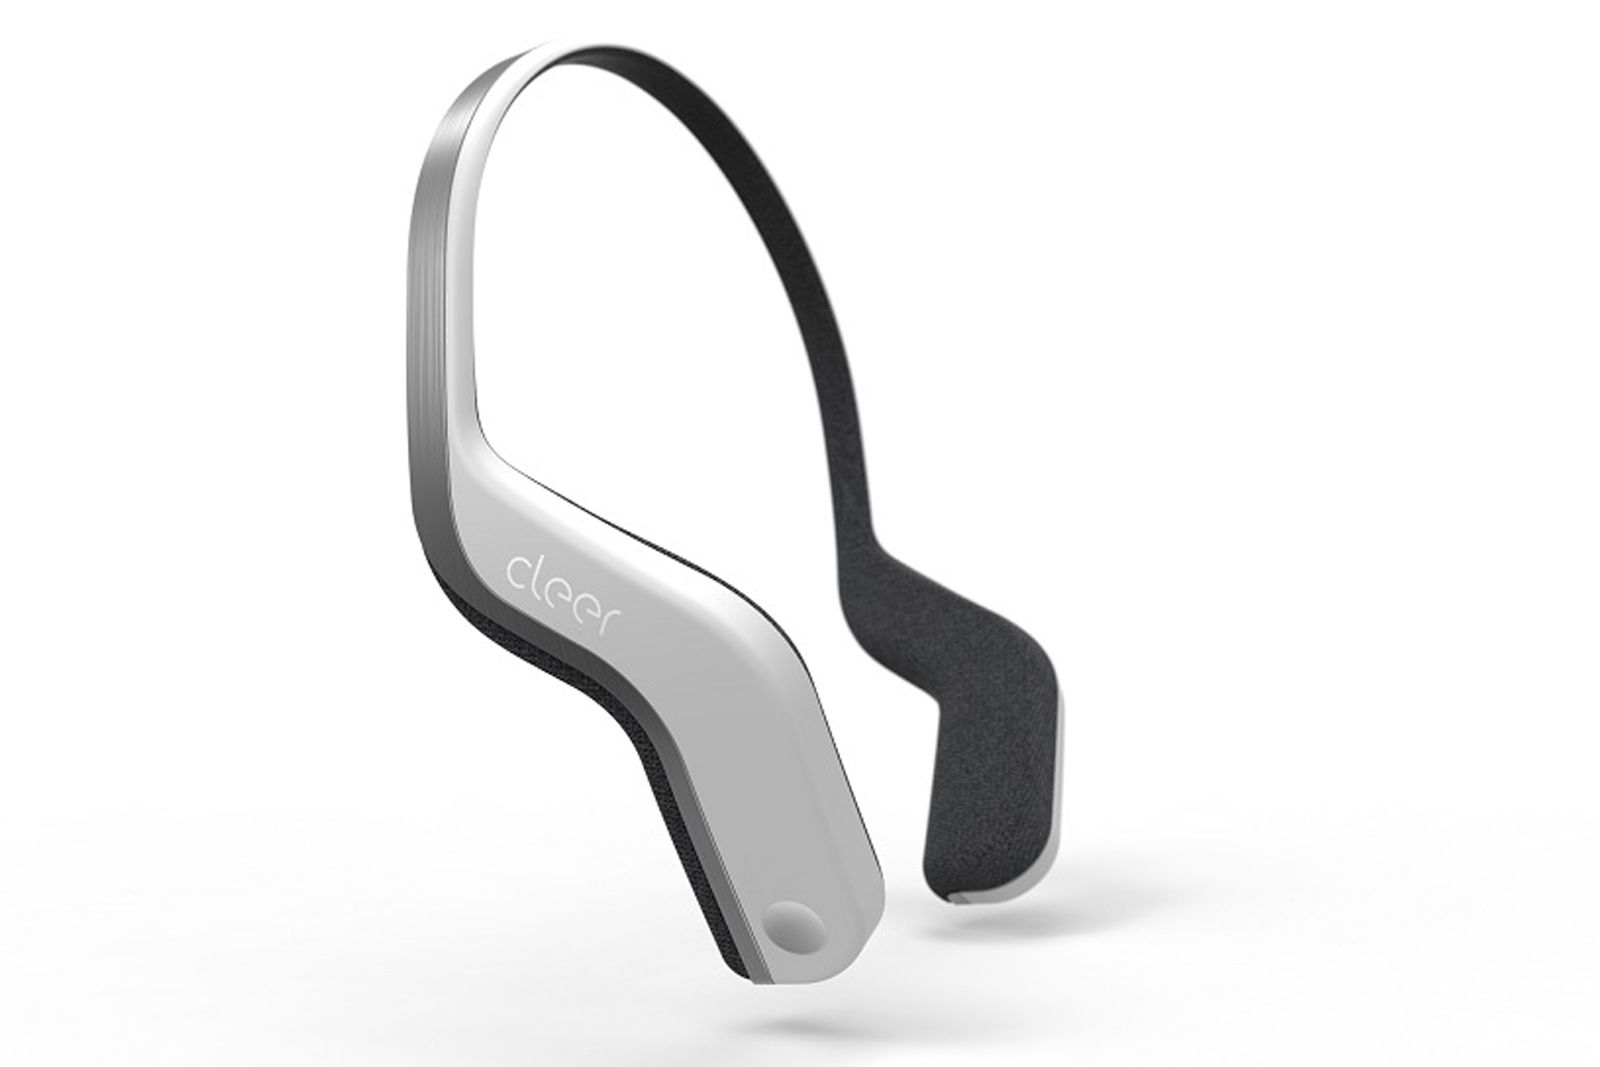 Cleer Goal are a pair of true wireless sport headphones with Google Assistant image 2